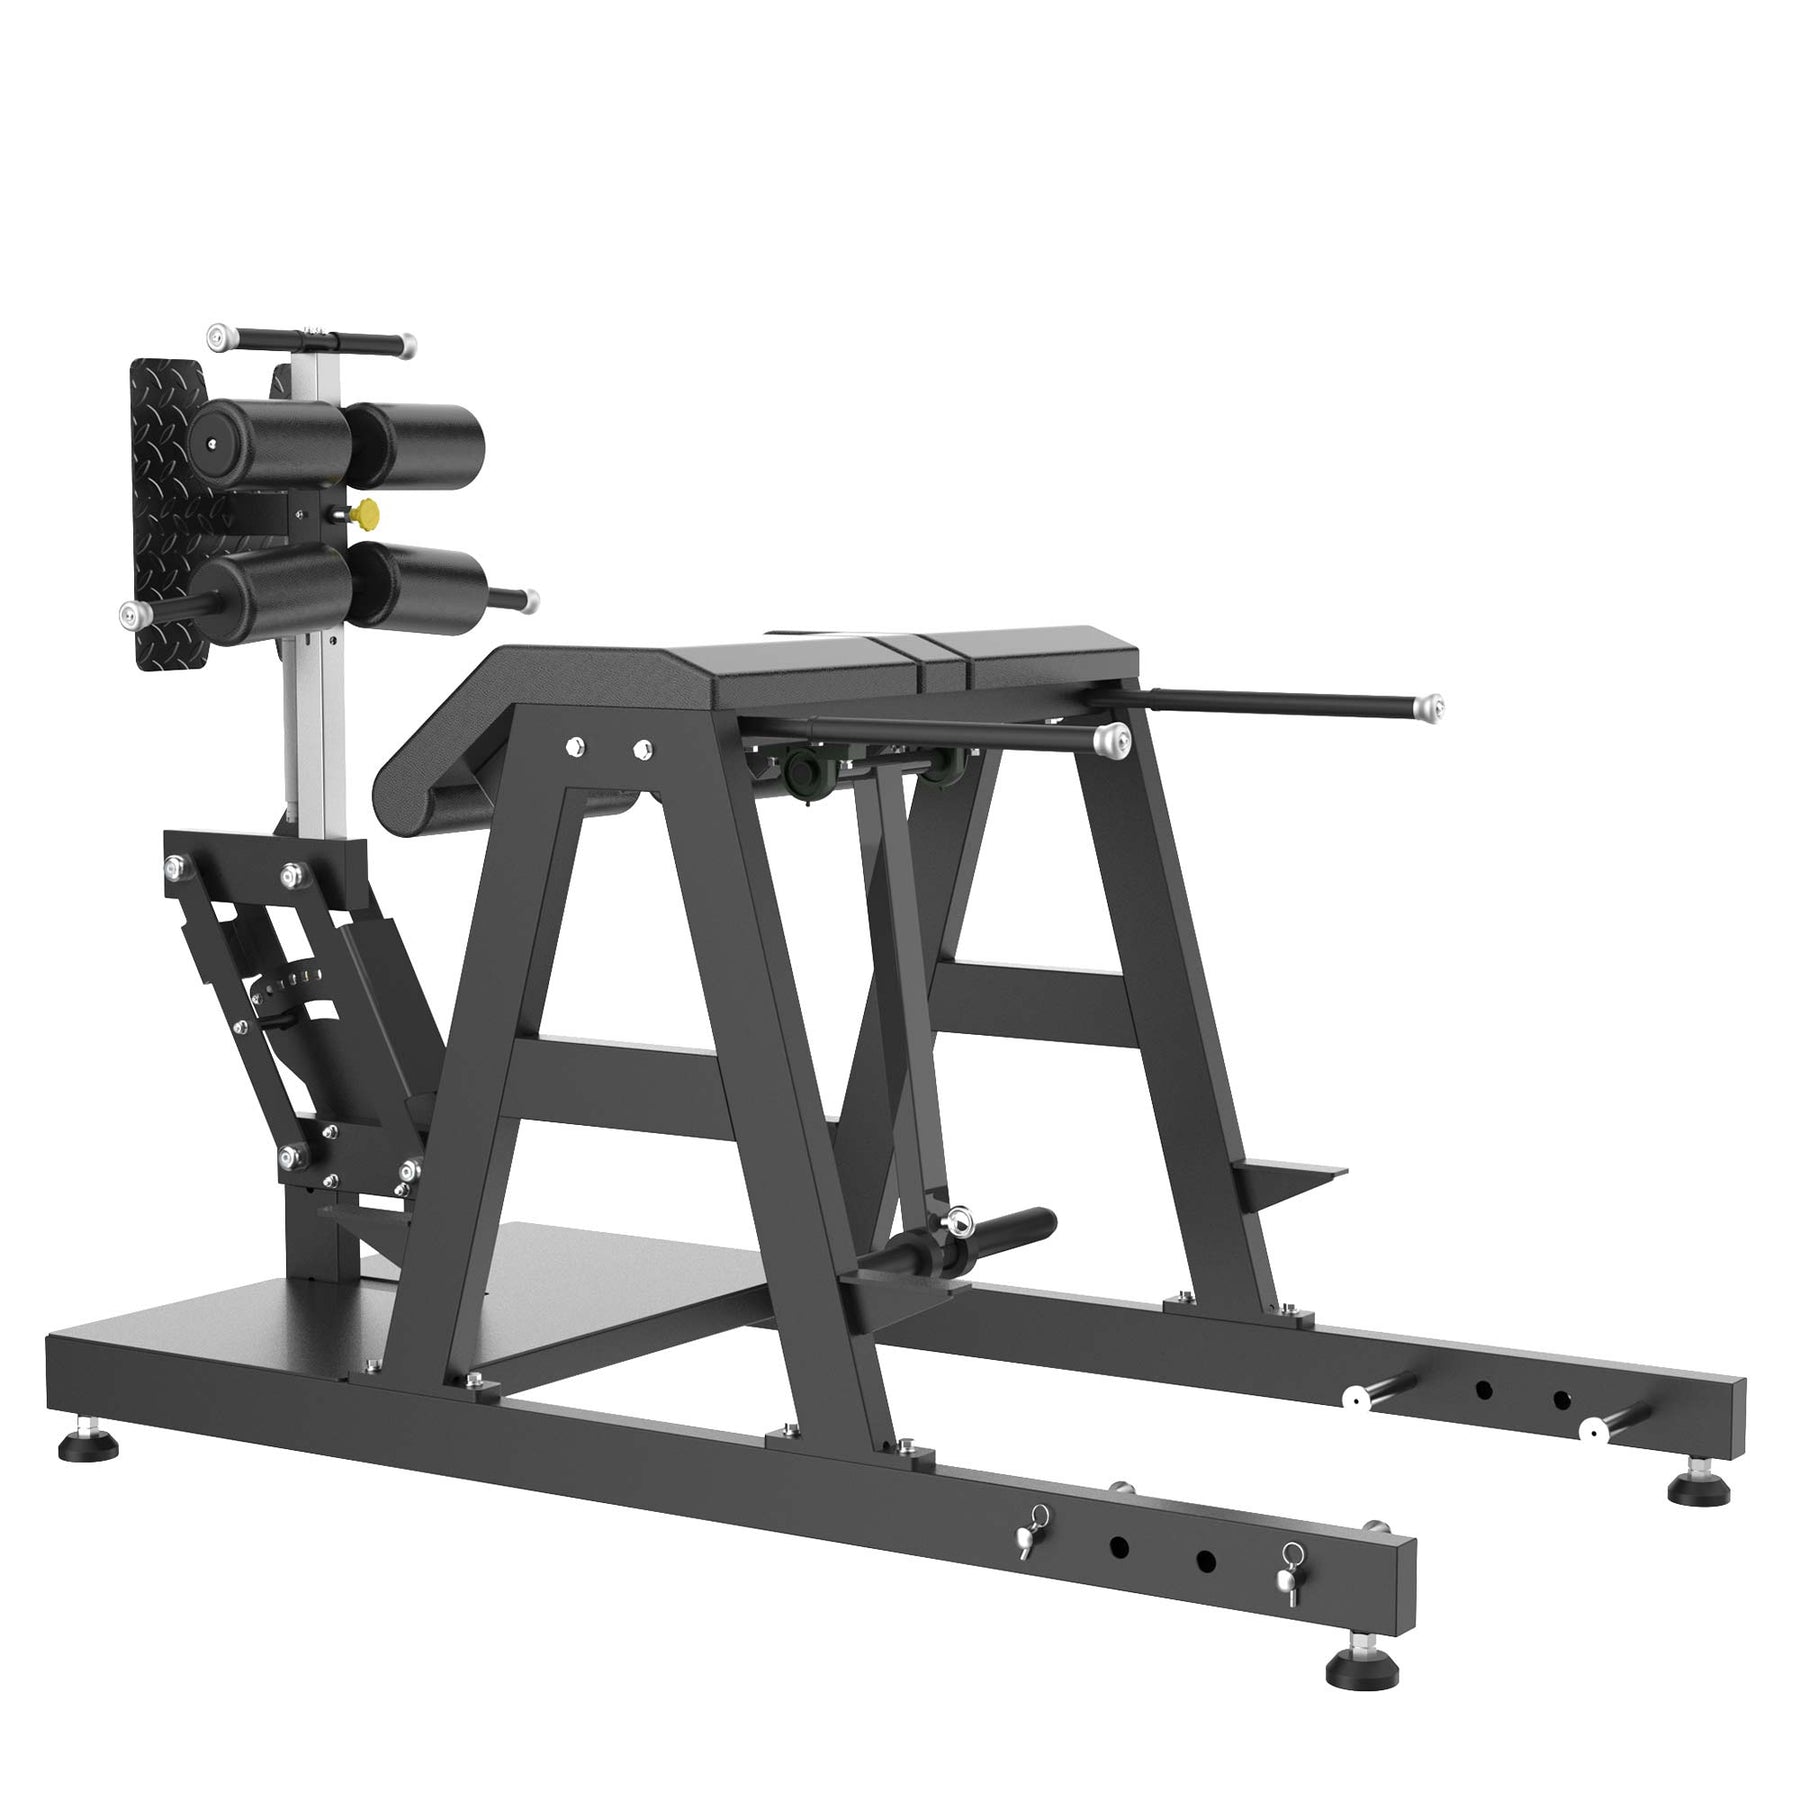 Reeplex Commercial GHD & Hyper Extension Multi Functional Trainer